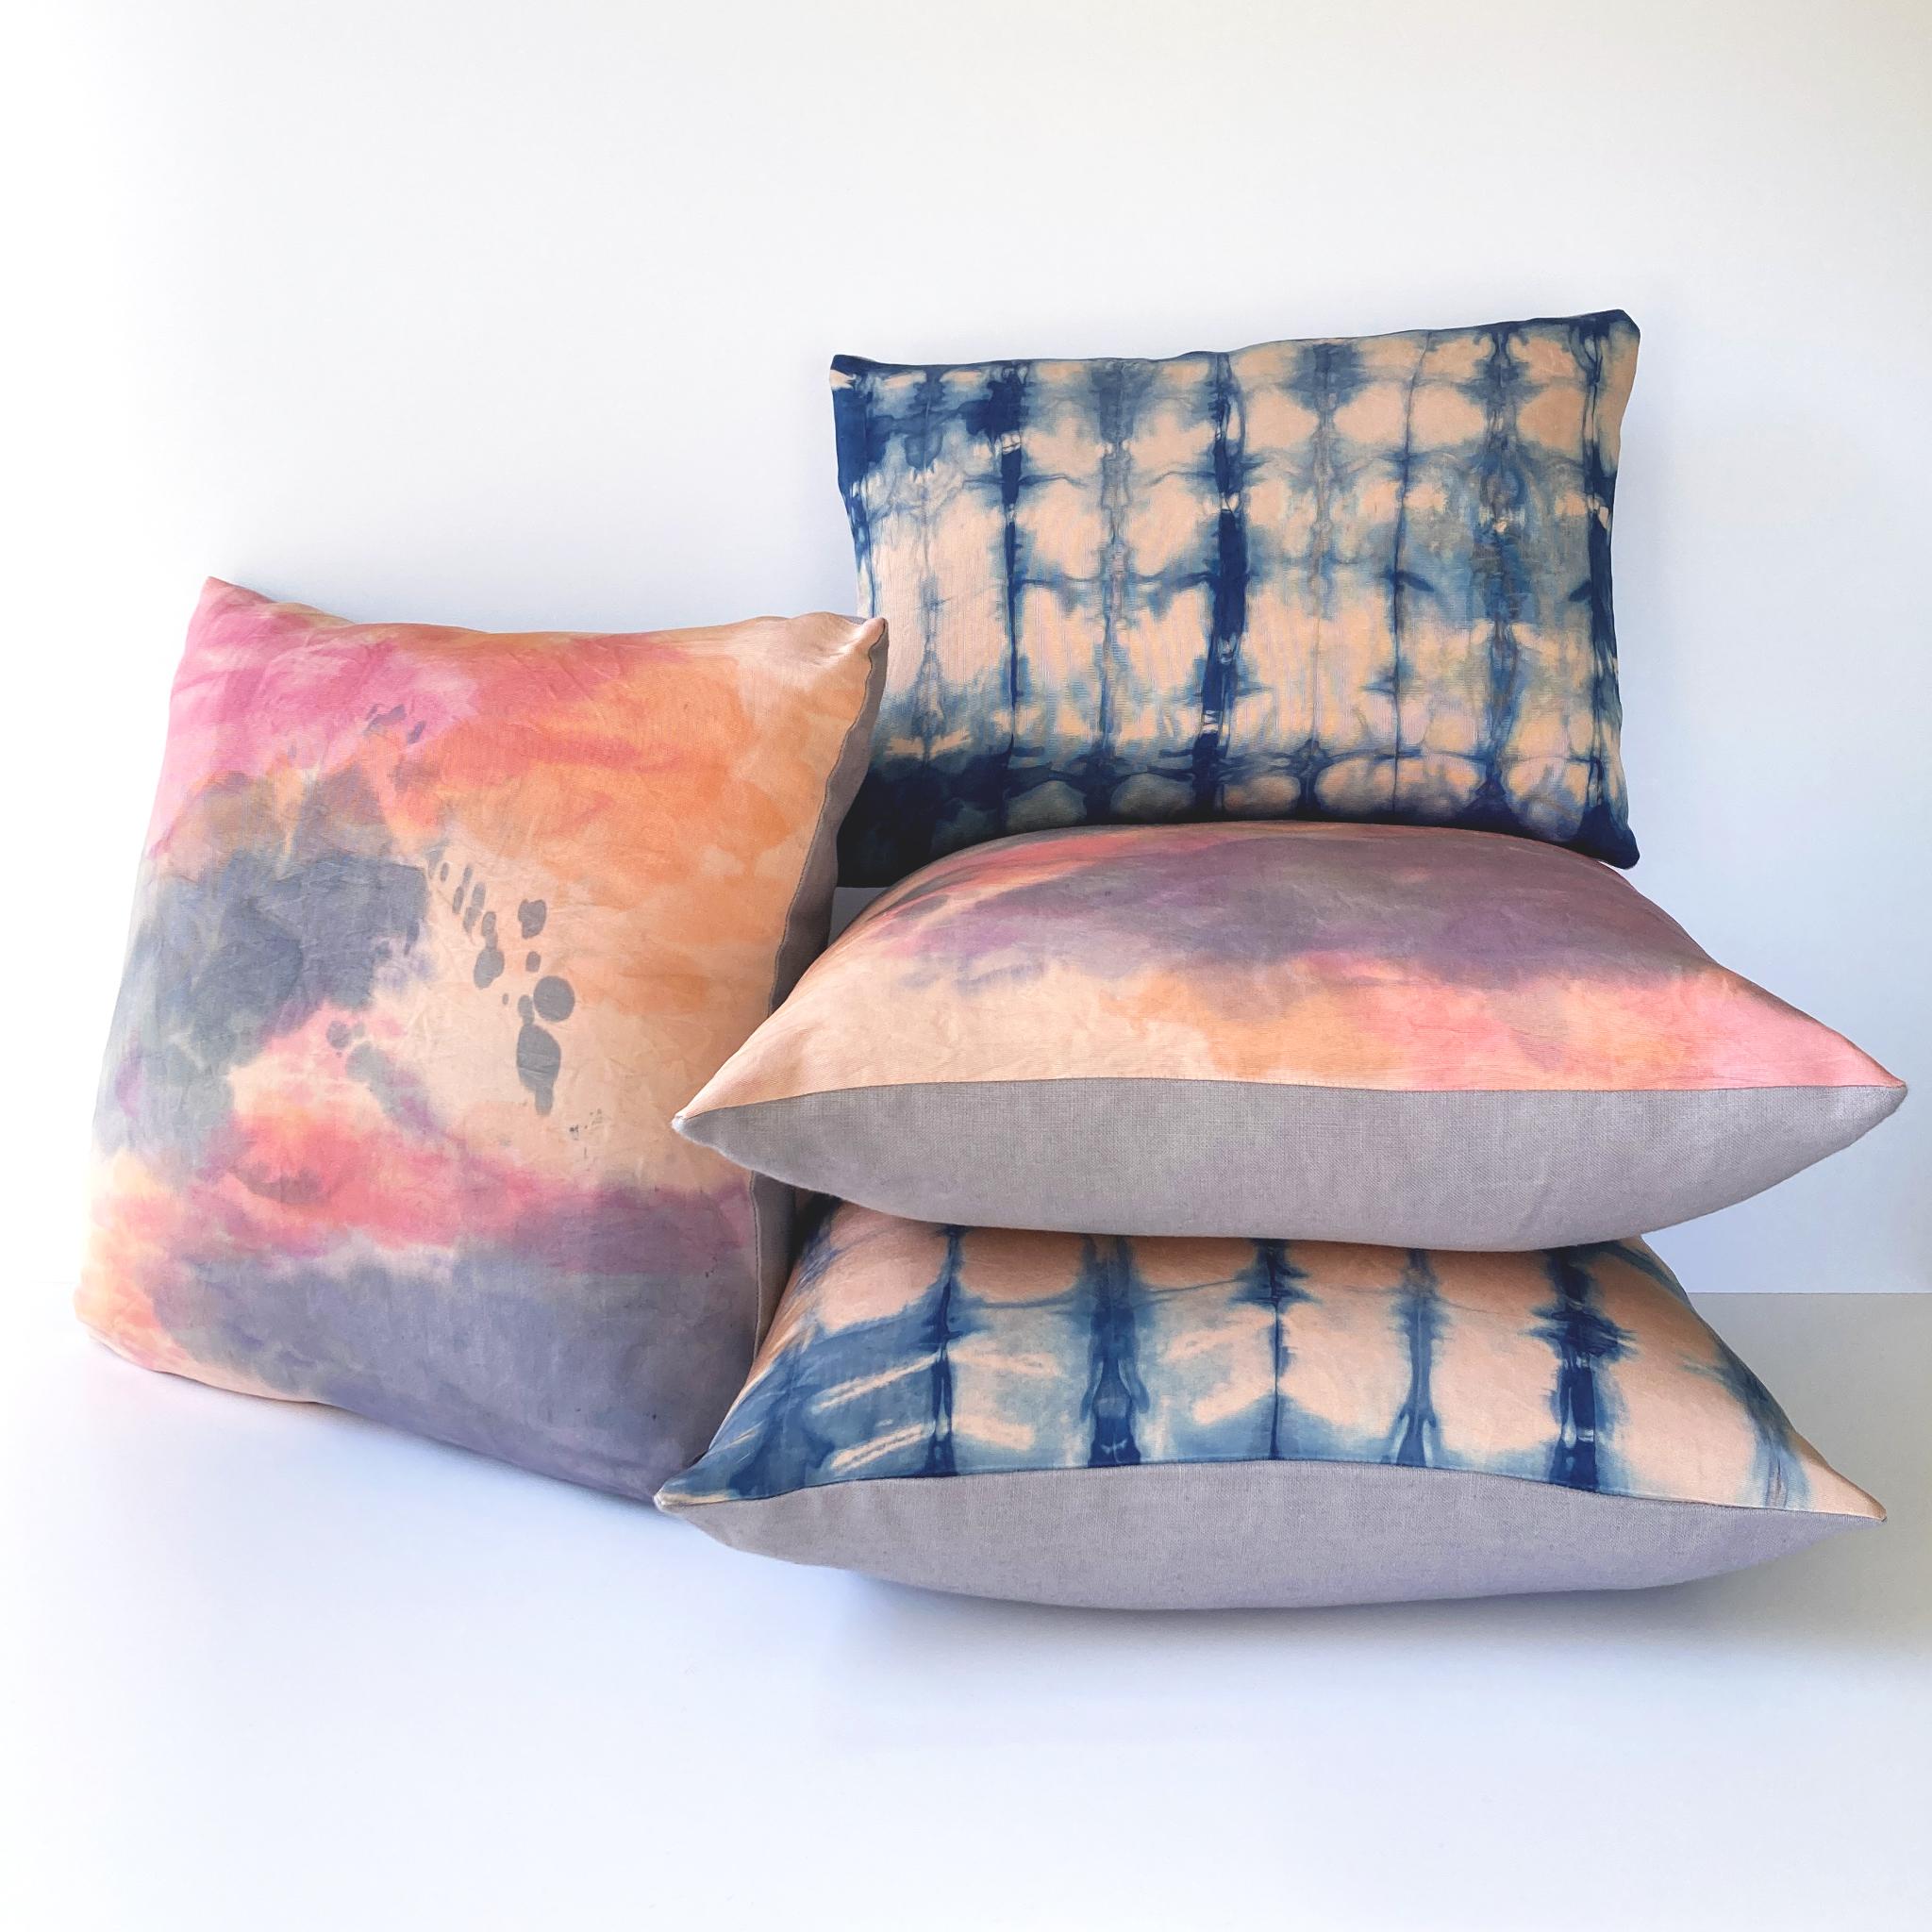 Rose silk faille pillow dyed with indigo in Ripple pattern with gray linen backing. Hand-dyed and sewn in New York City, down pillow insert made locally in NYC. Pillow measures 12 x 16 inches. Each silk pillow is hand made and one of a kind.

Custom